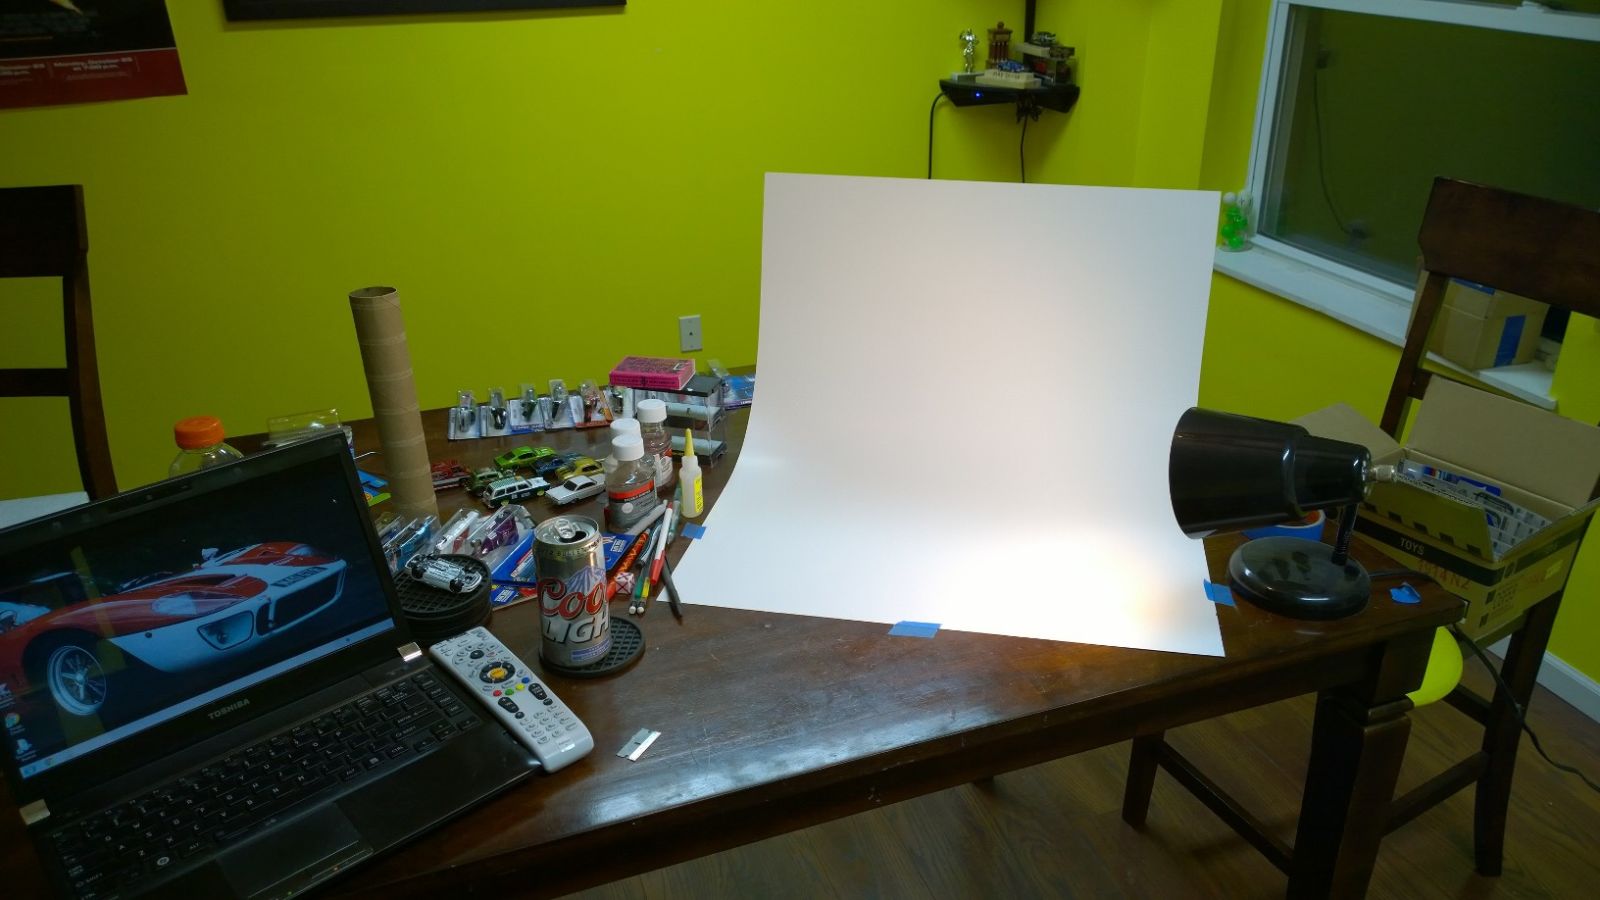 Illustration for article titled Makeshift photo booth...lets see how this works